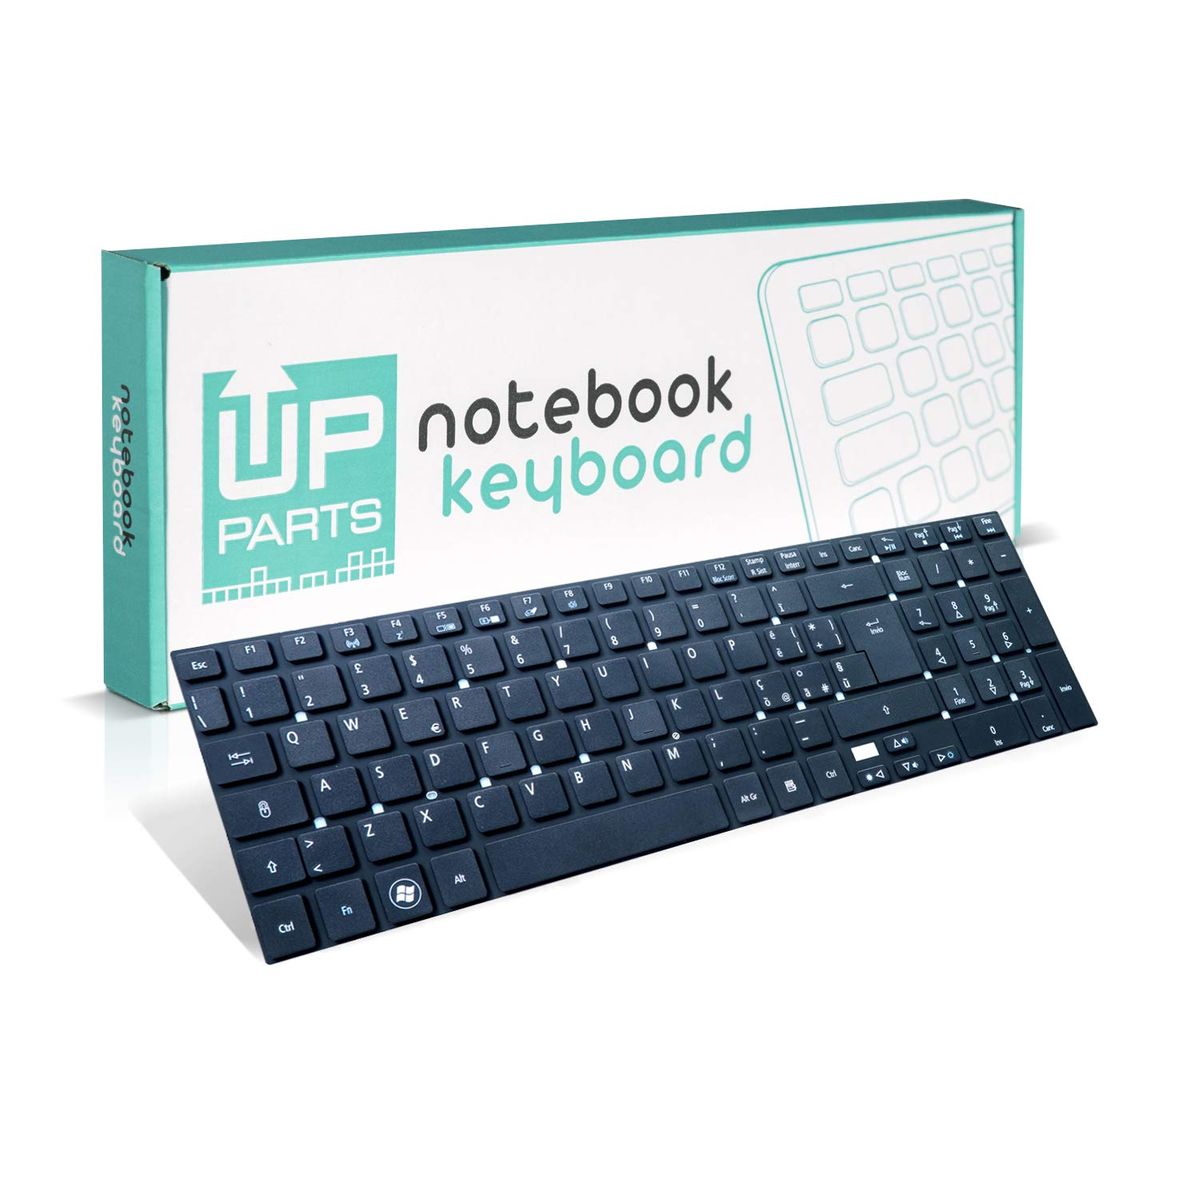 Keyboard for acer ASPIRE Original Uptown leader of the parts notebook (ITA Layout - QWERTY)